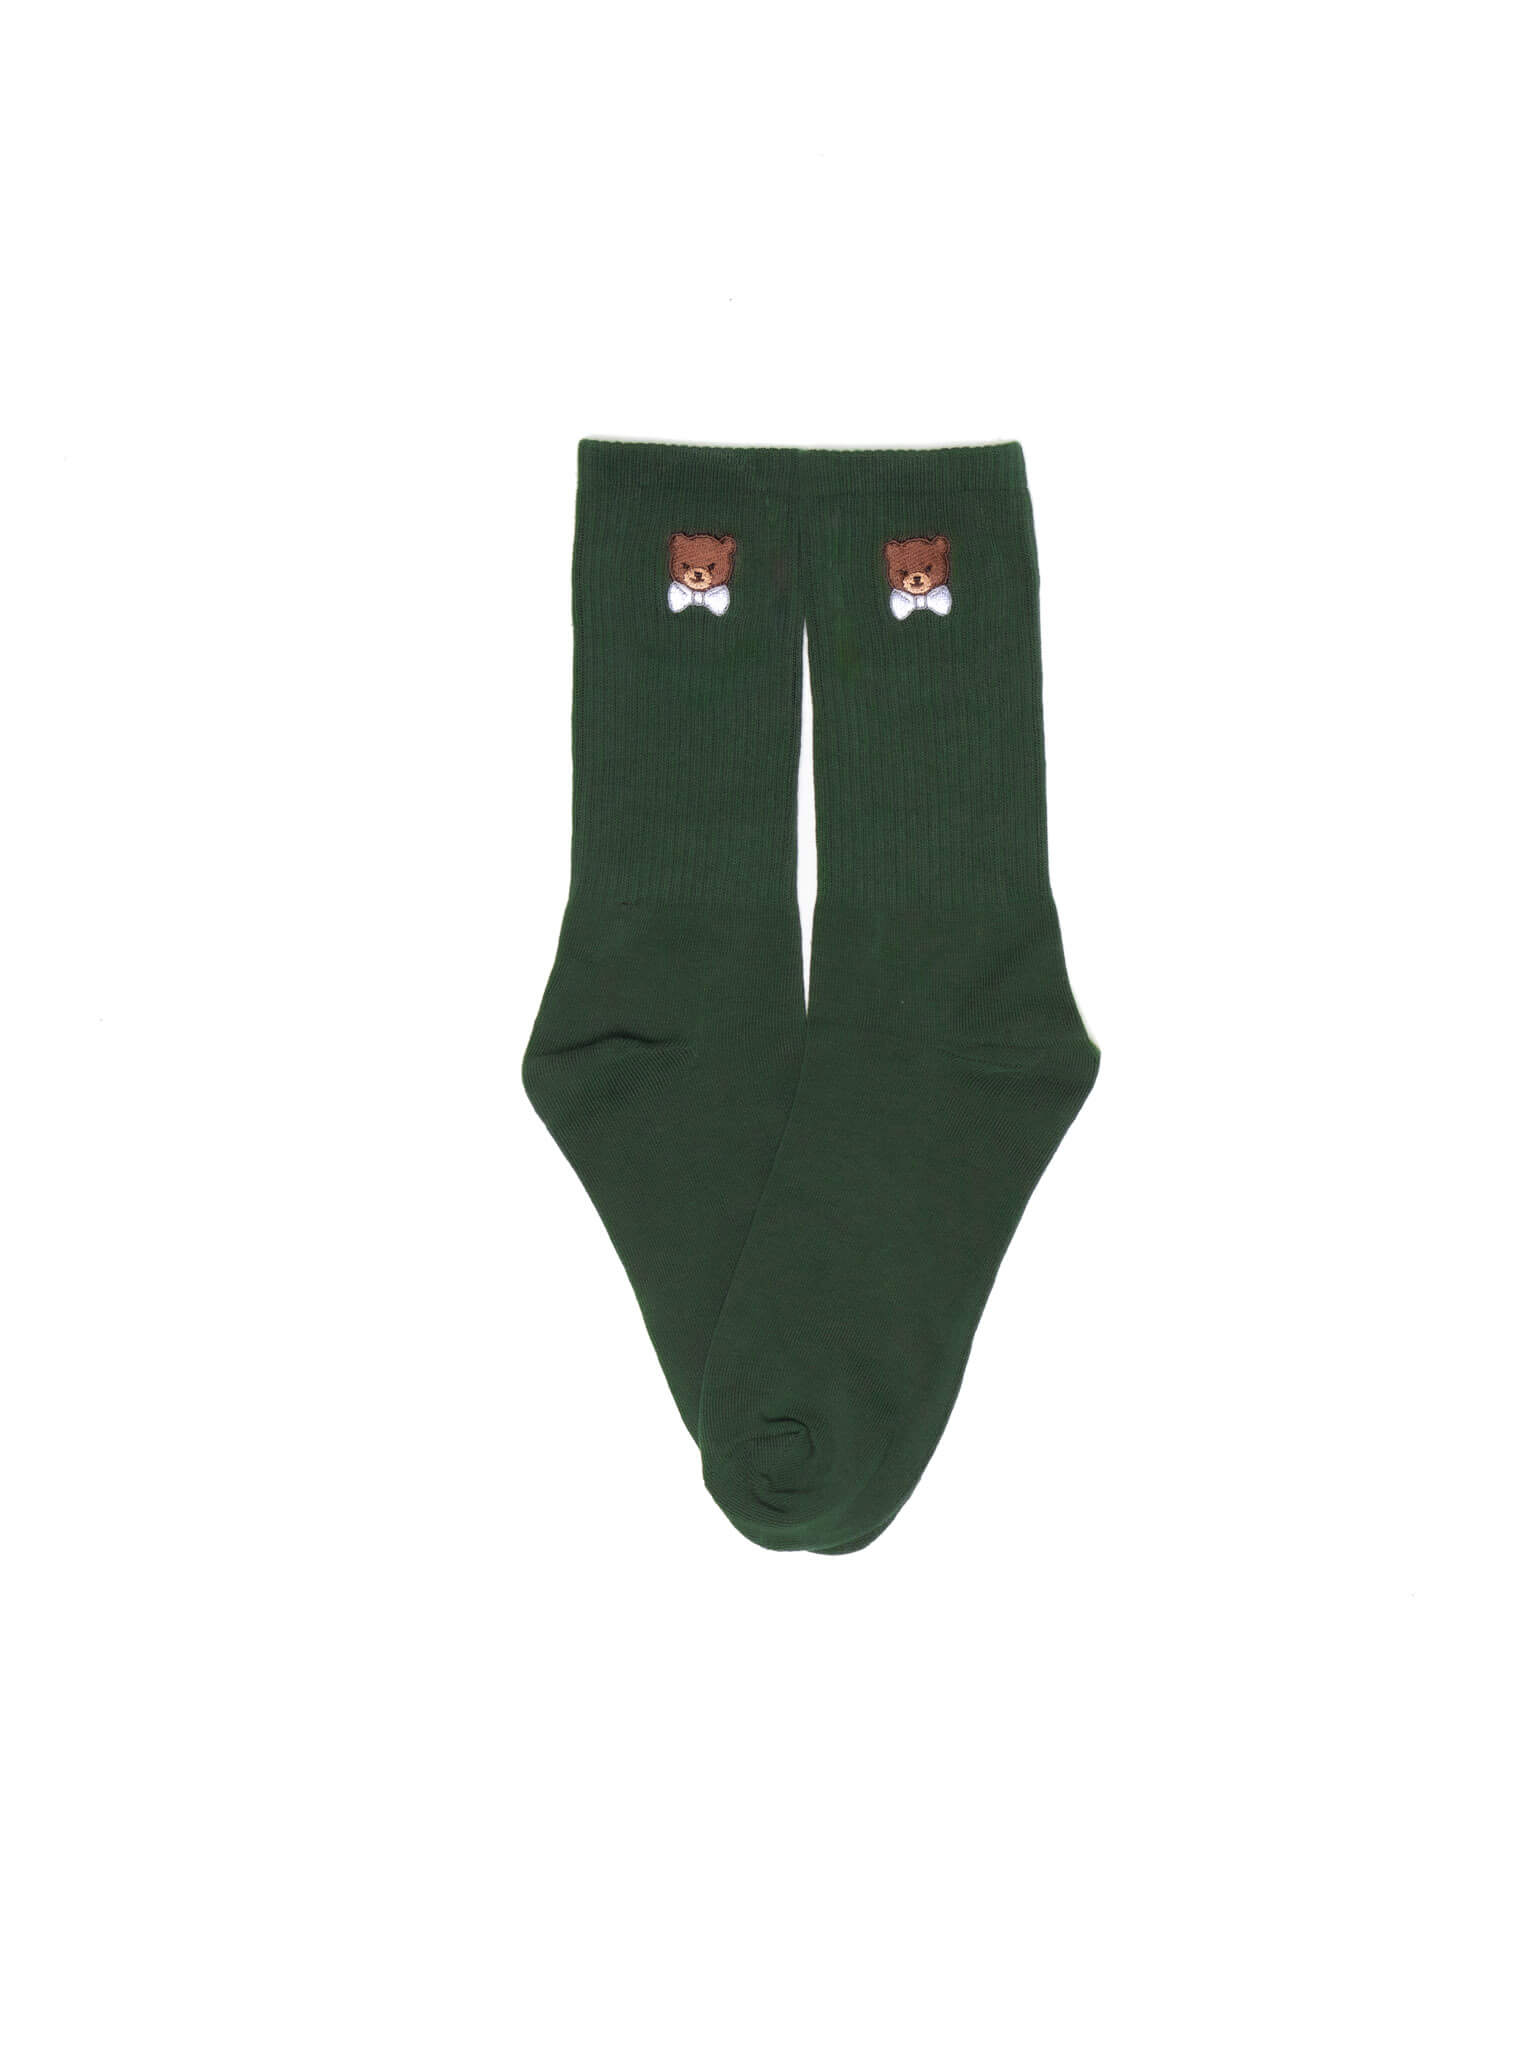 Ra Javar Clothing - Embroidered Bear Socks - 
Cotton/Polyester/Spandex
premium USA -made
Cushioned sole
Machine wash
One Size Fits All
 - rajavarclothing